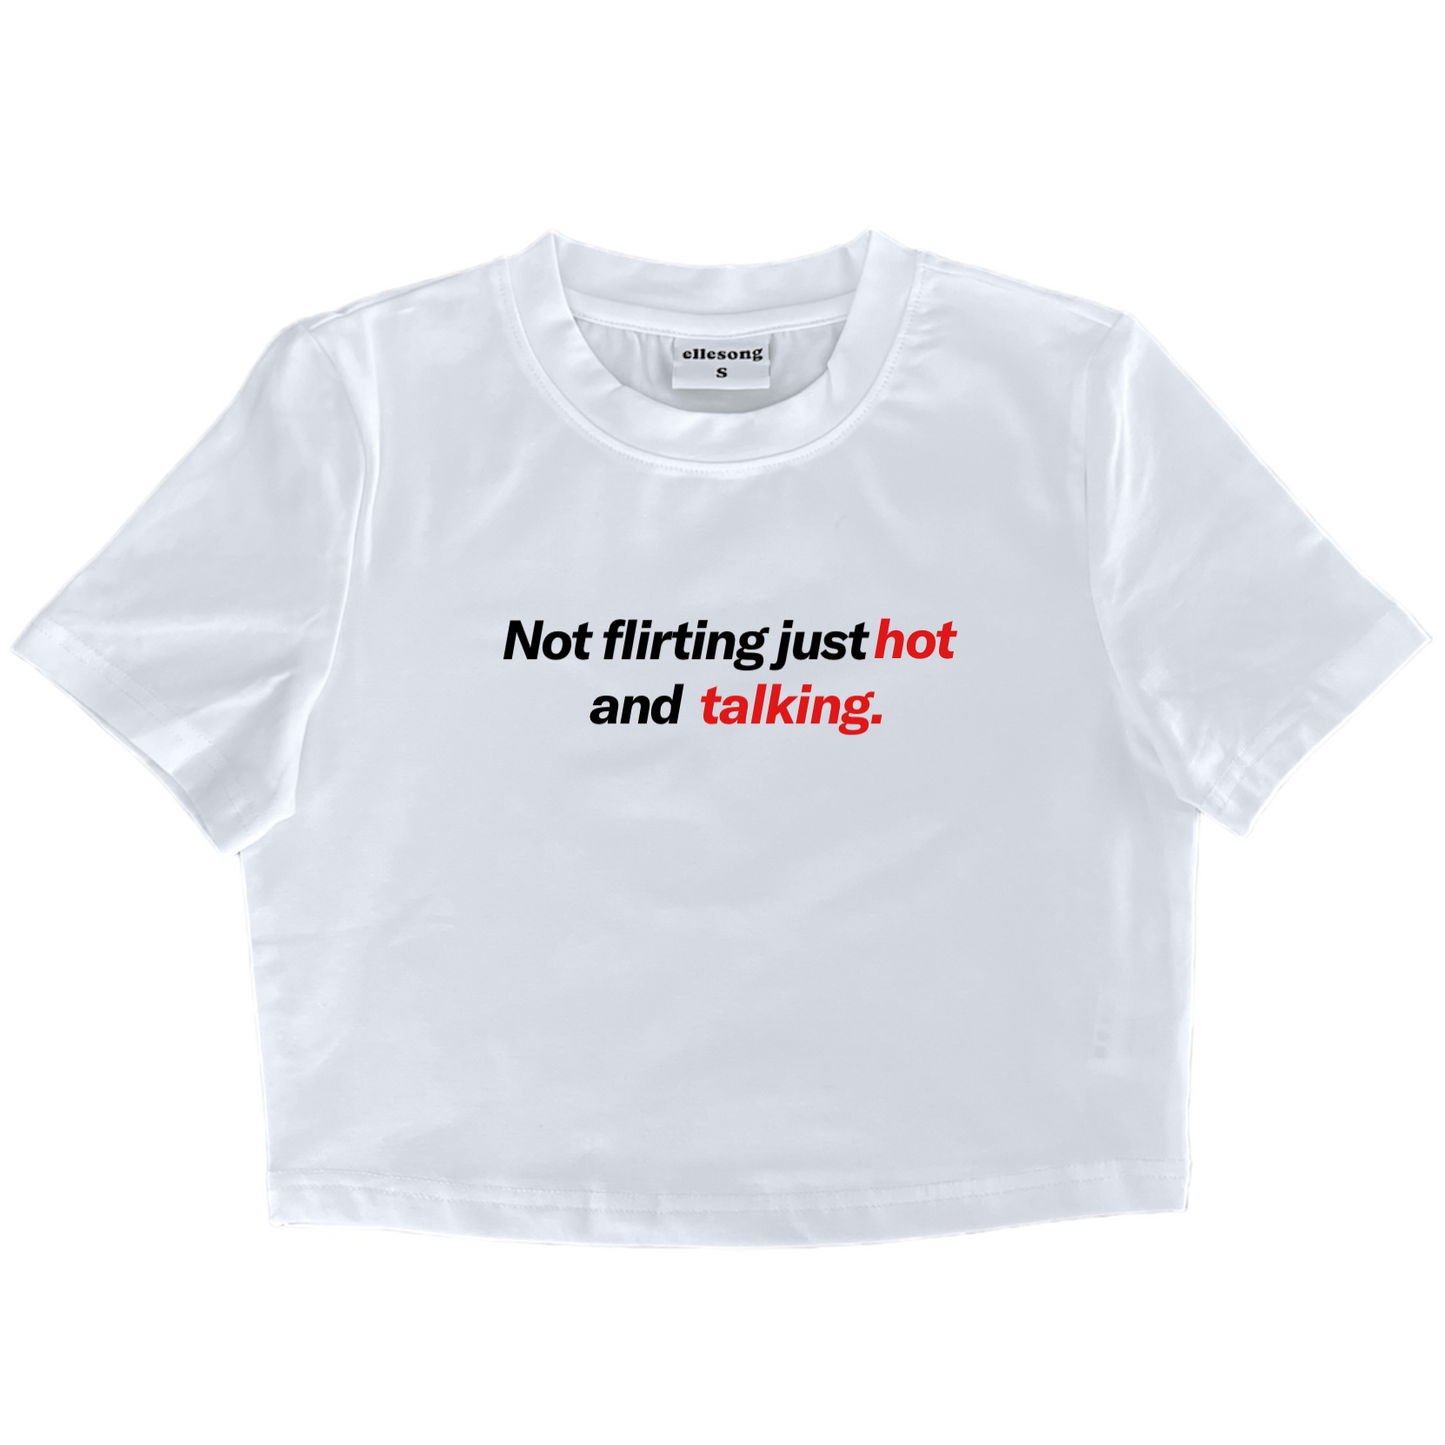 Not Flirting Just Hot and Talking Baby Tee